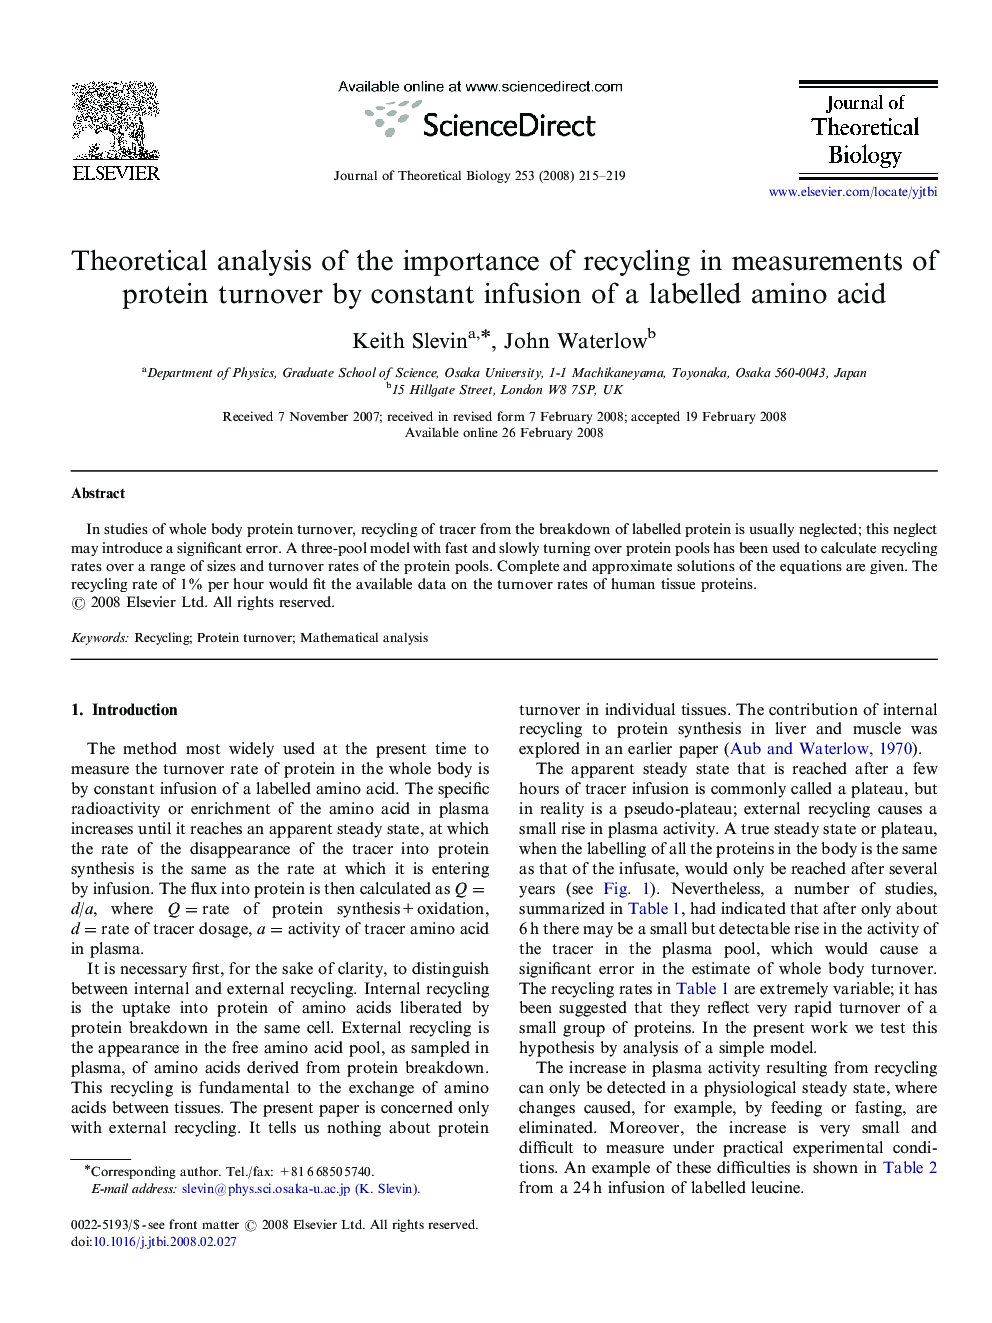 Theoretical analysis of the importance of recycling in measurements of protein turnover by constant infusion of a labelled amino acid